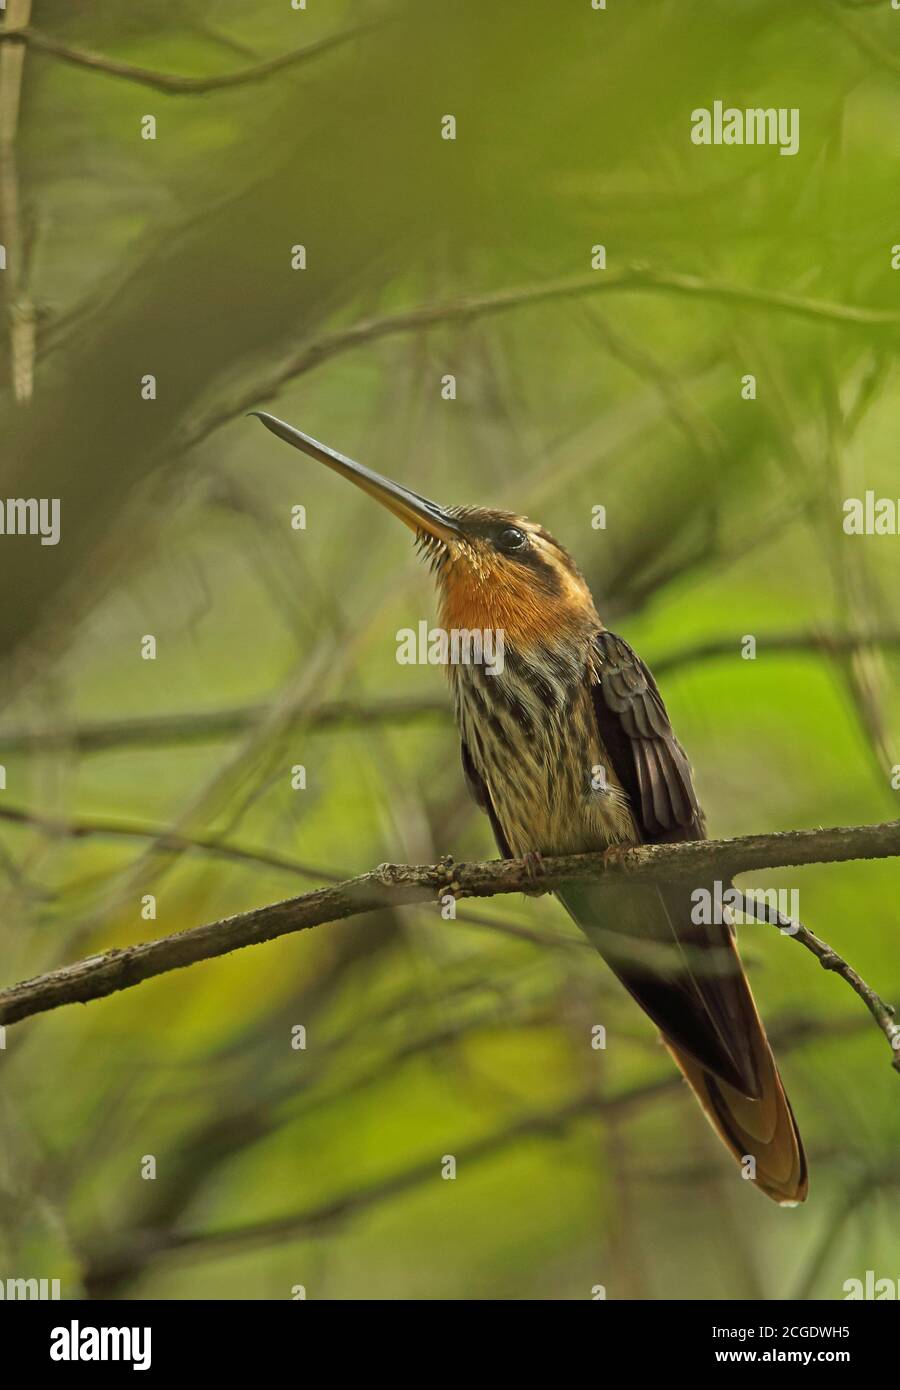 Saw-billed Hermit (Ramphodon naevius) adult male perched on twig   REGUA, Atlantic Rainforest, Brazil         July Stock Photo